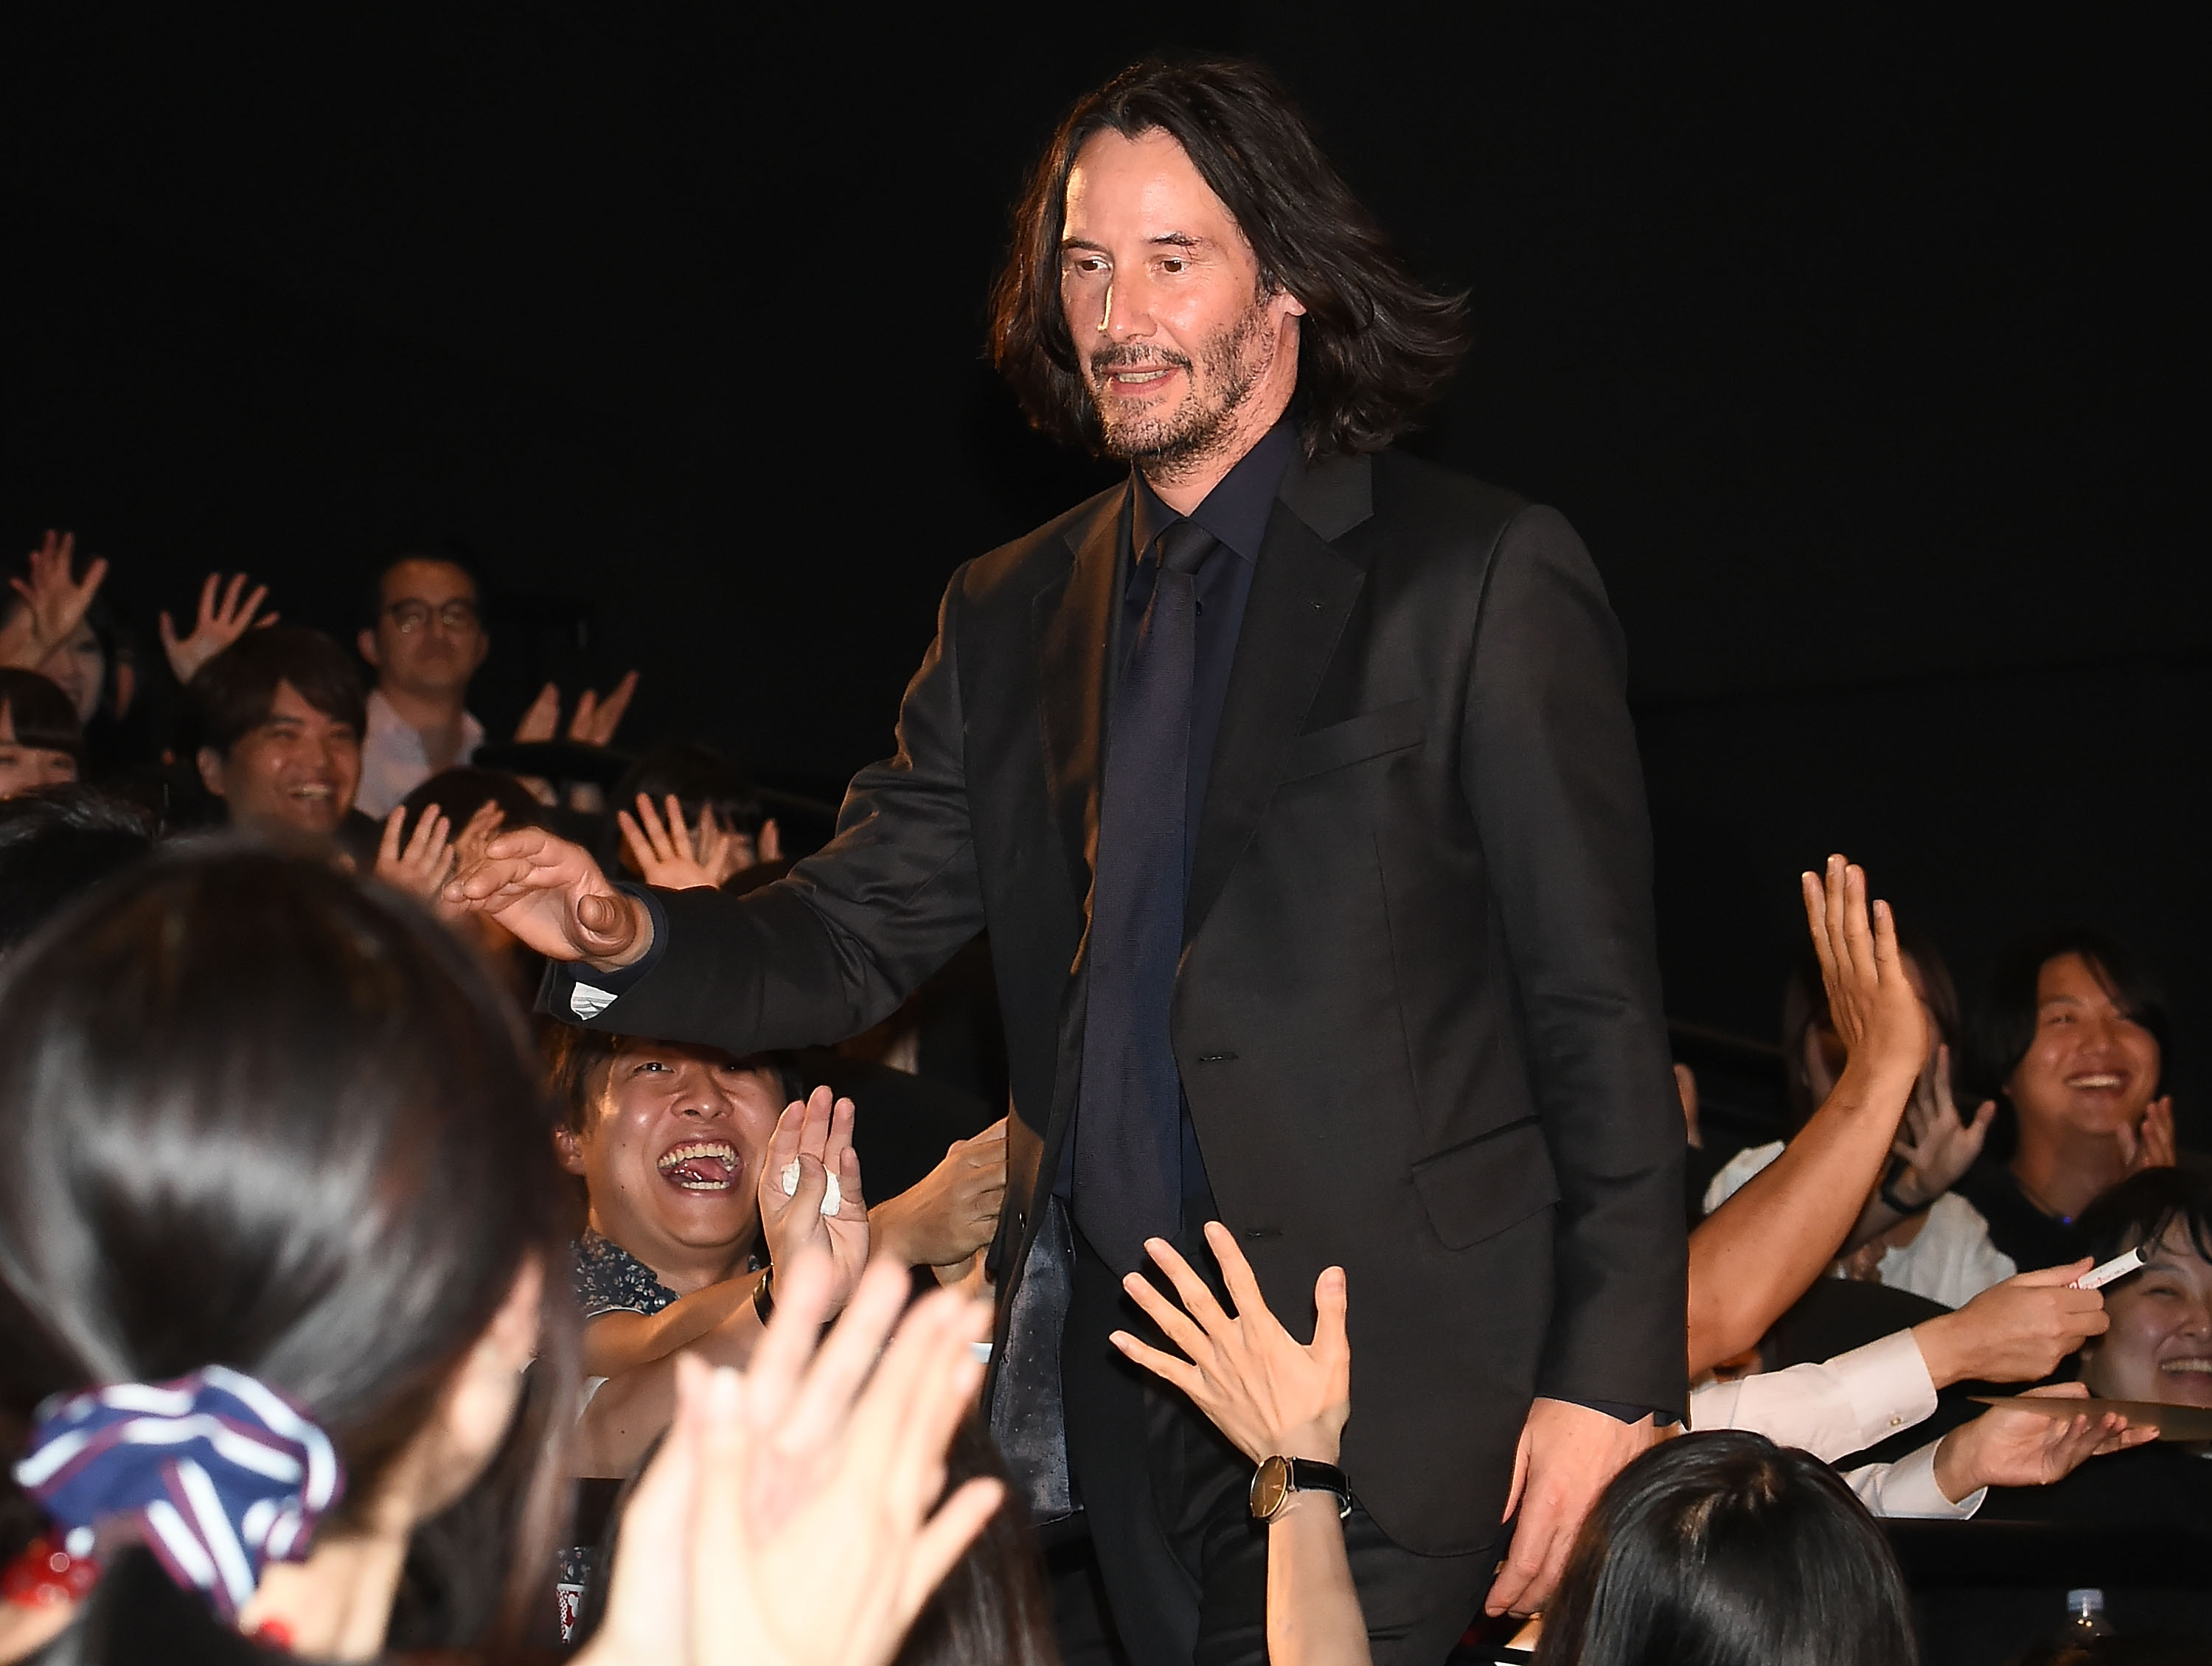 Keanu Reeves attends the stage greeting for 'John Wick: Chapter 3 - Parabellum' Japan premiere at Roppongi Hills in Tokyo, Japan, on September 10, 2019. | Source: Getty Images